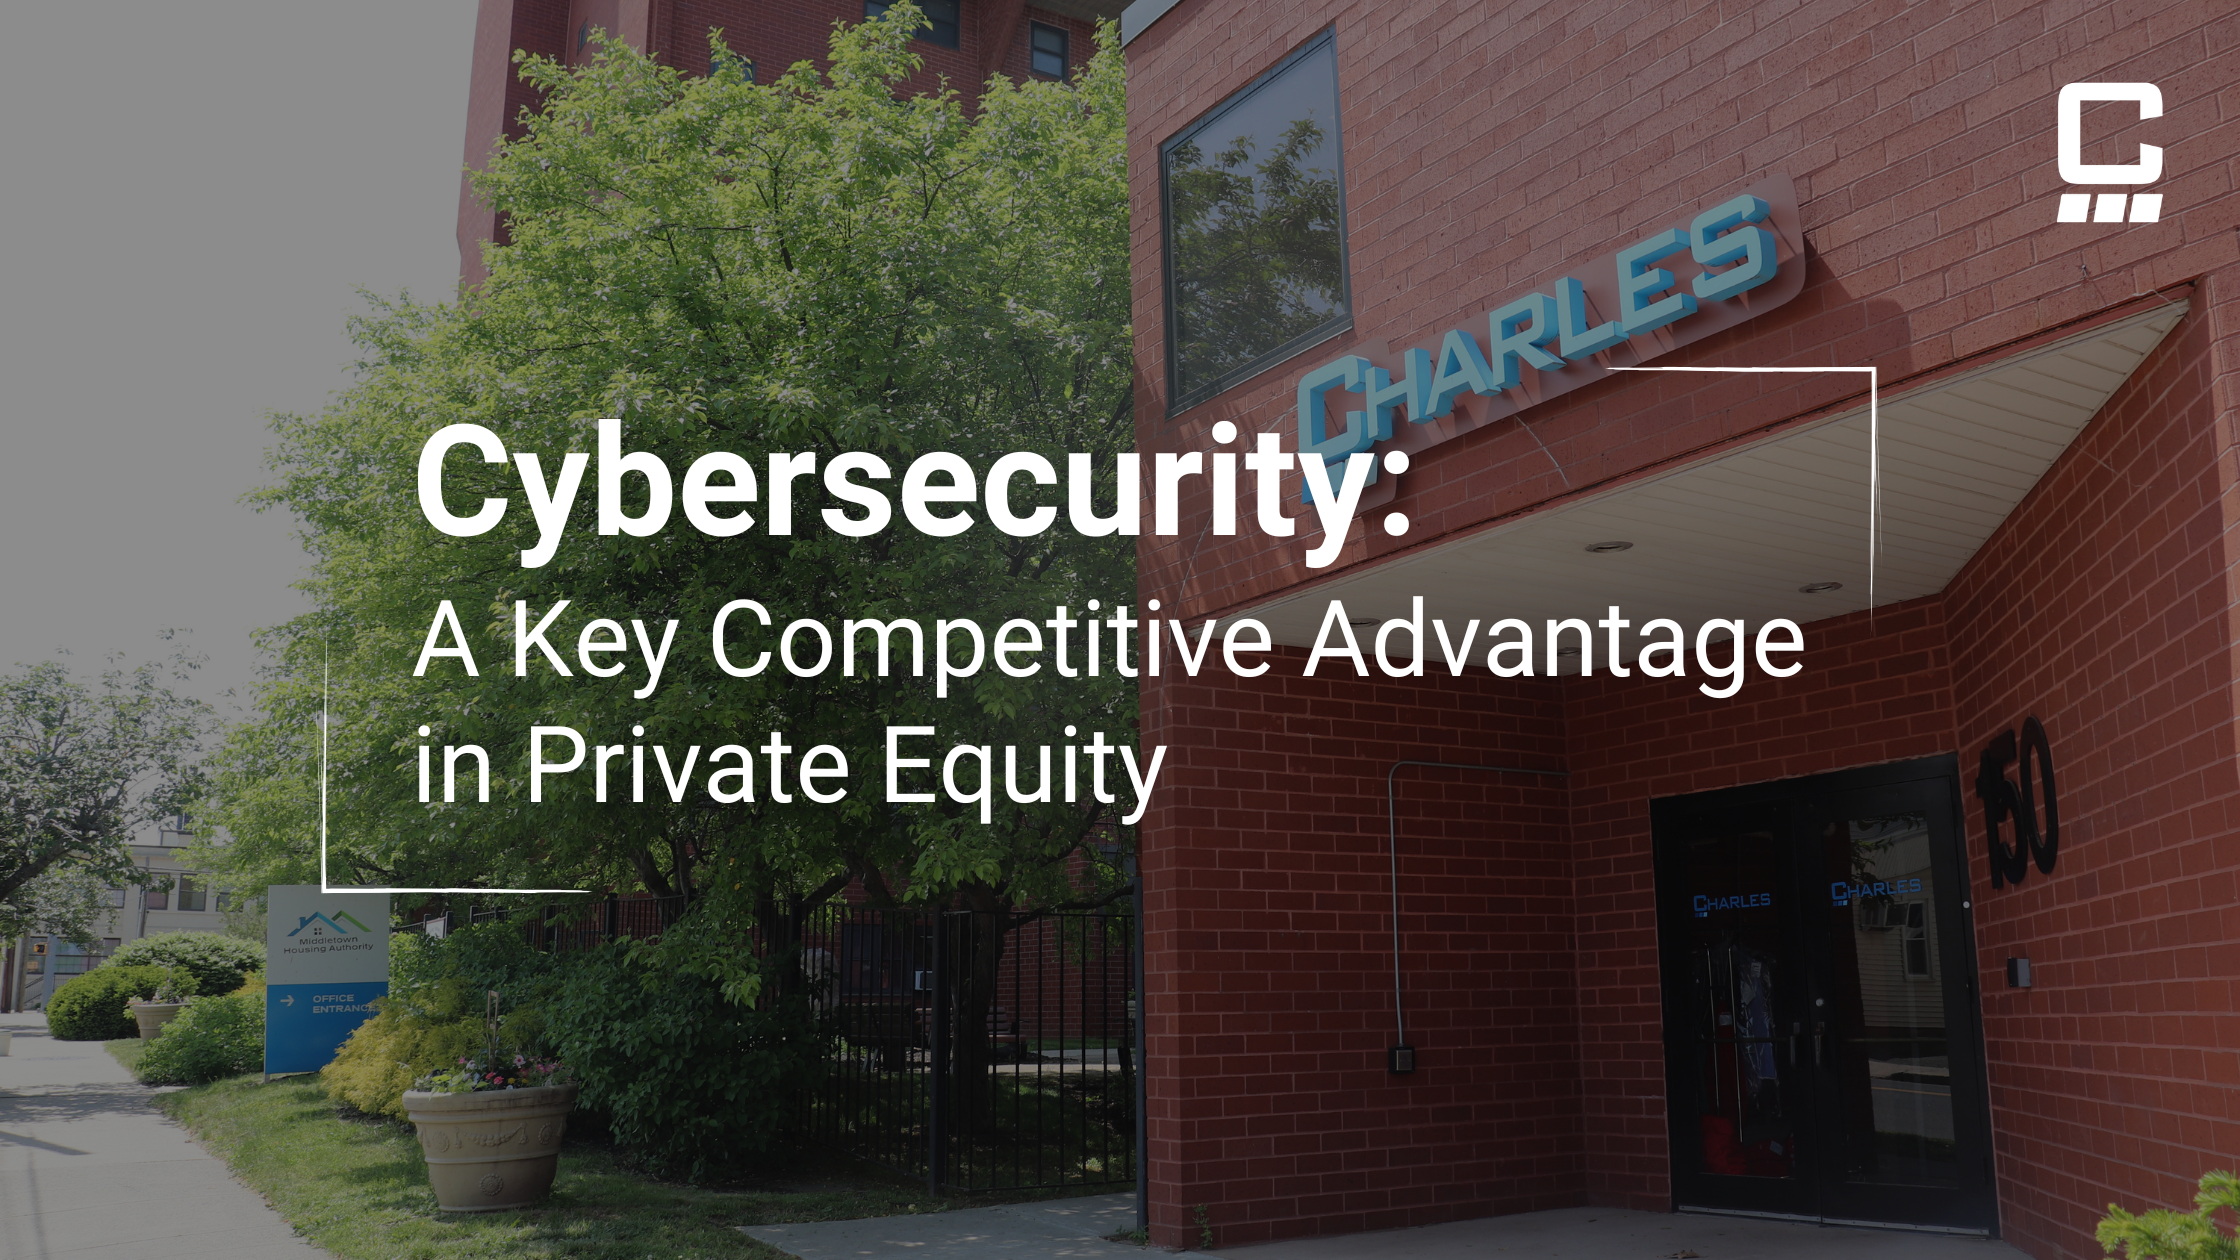 Cybersecurity: A Key Competitive Advantage in Private Equity